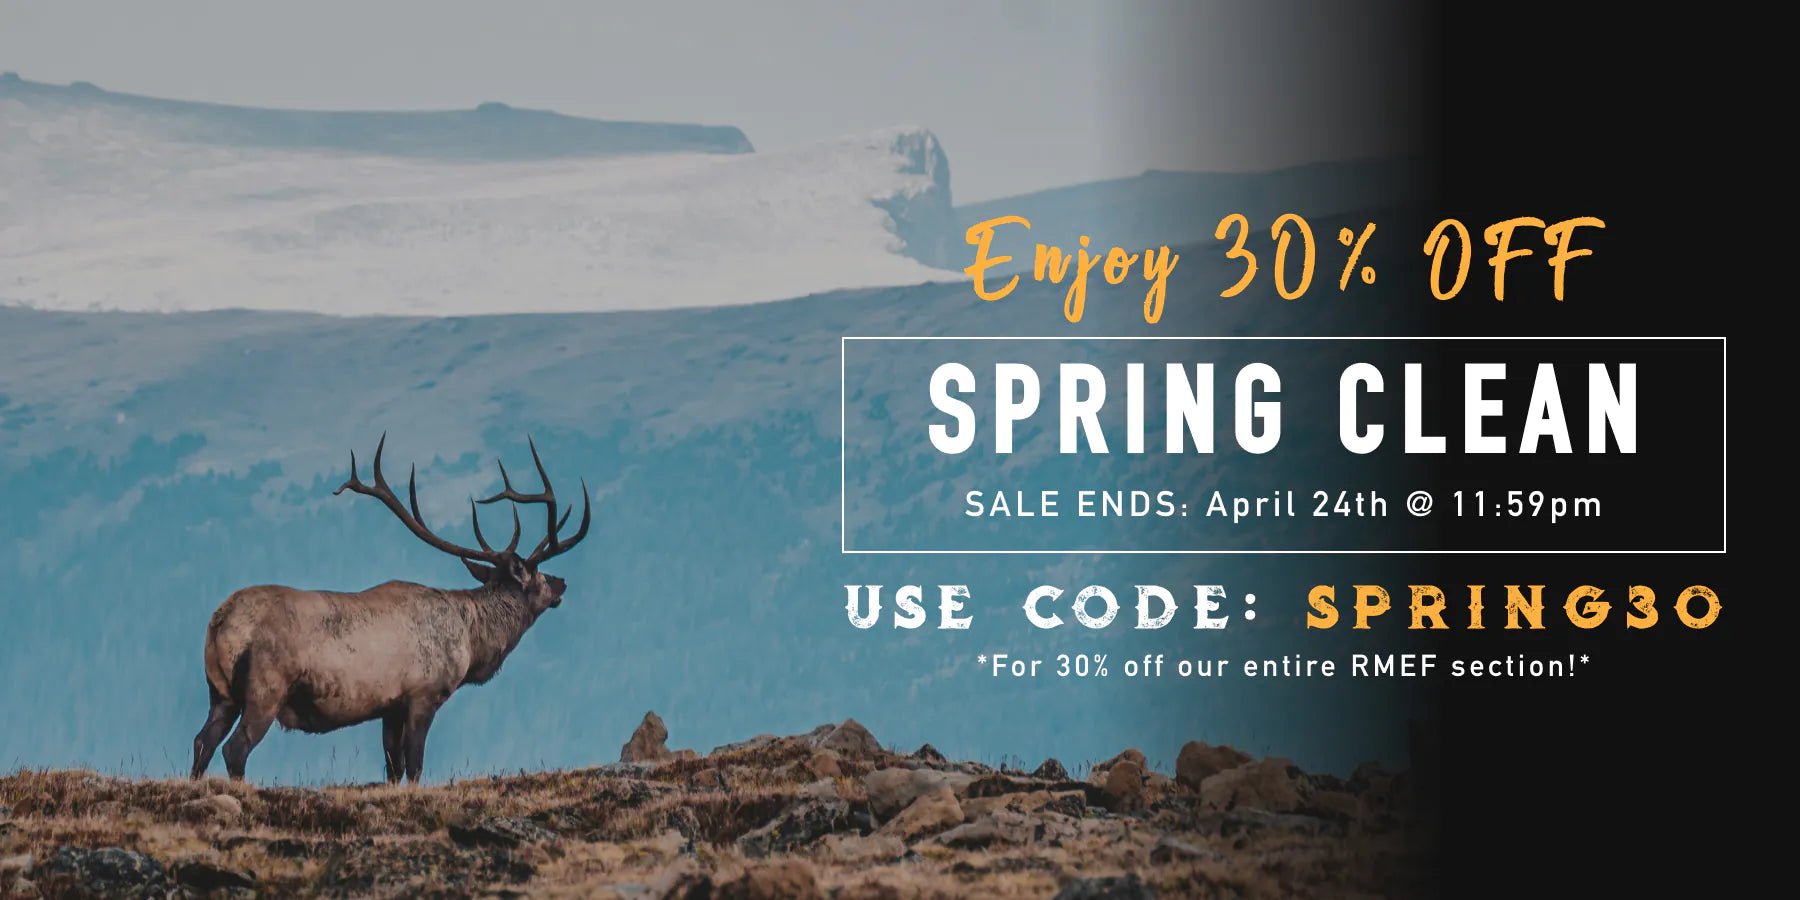 Enjoy 30% OFF - SPRING CLEAN - SALE ENDS: APRIL 24TH @ 11:59PM - USE CODE: SPRING30 *For 30% off our entire RMEF section!*